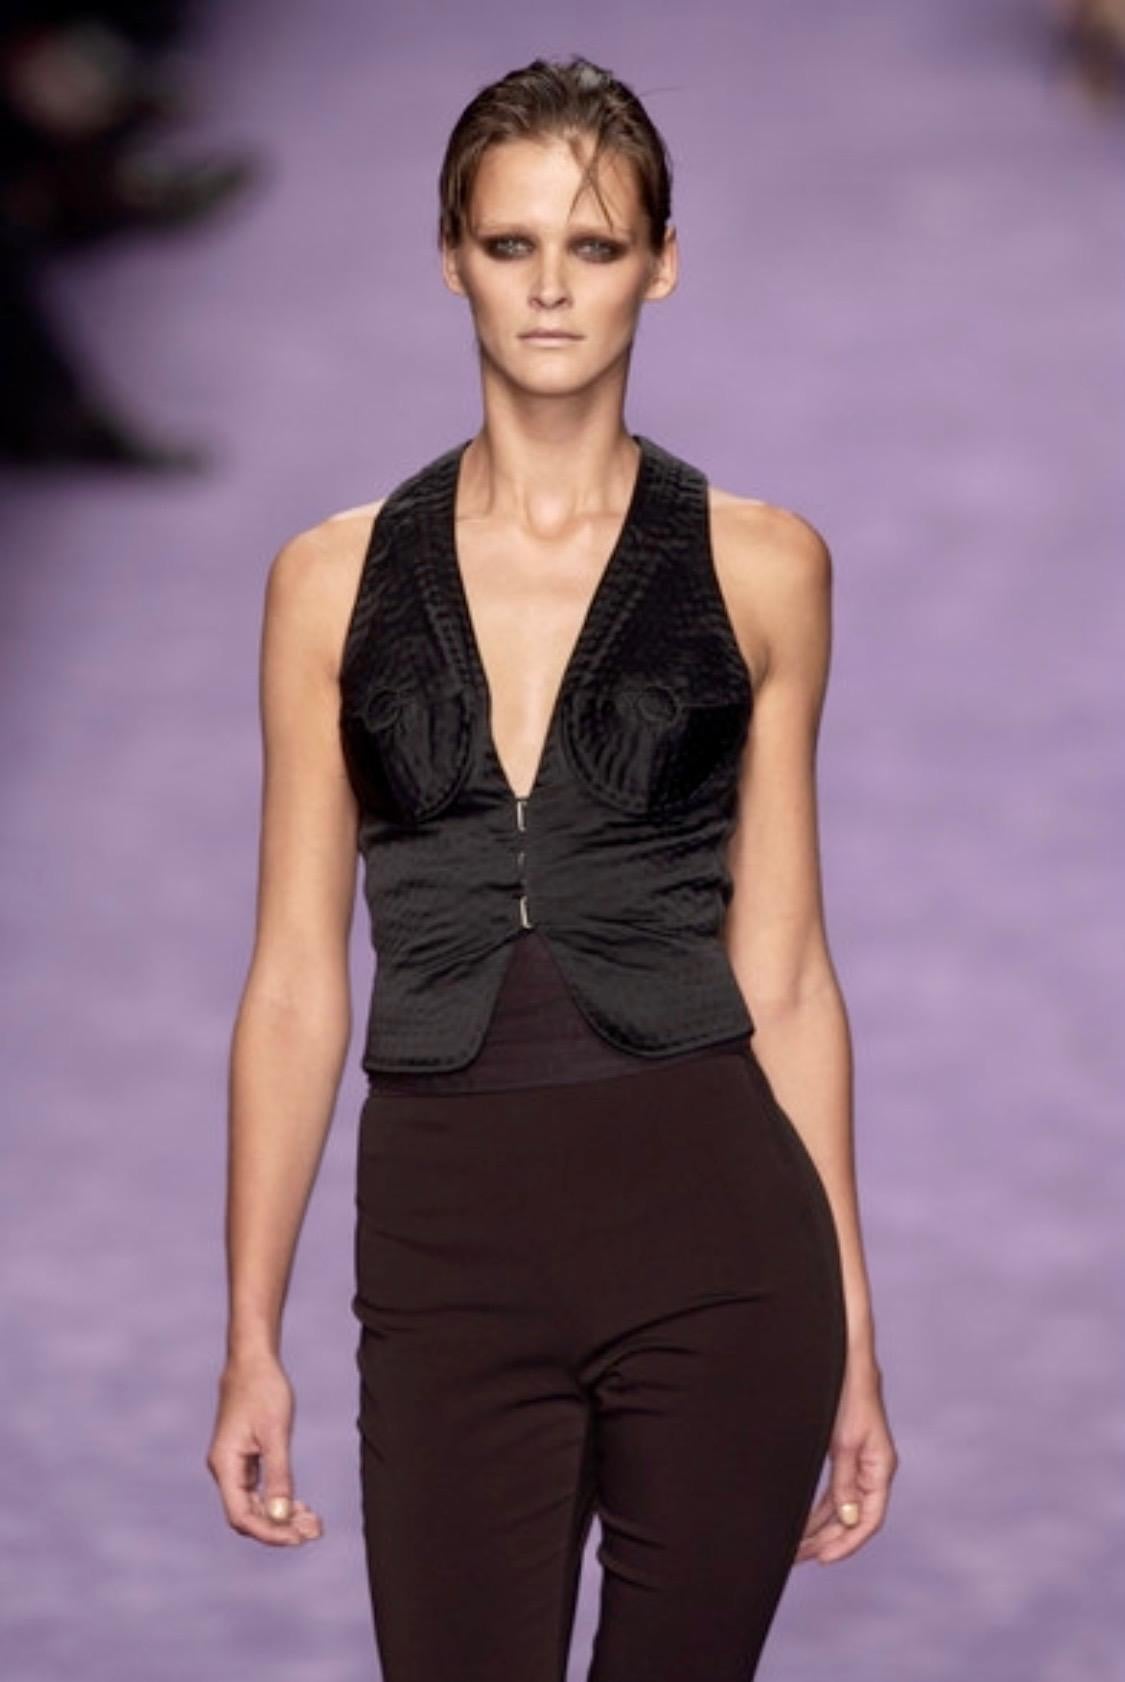 TheRealList presents: a black nude illusion Yves Saint Laurent Rive Gauche vest/top, designed by Tom Ford. This eye-catching vest debuted on look number 33 on Carmen Kass in the Spring/Summer 2003 runway presentation. The patterned stitching